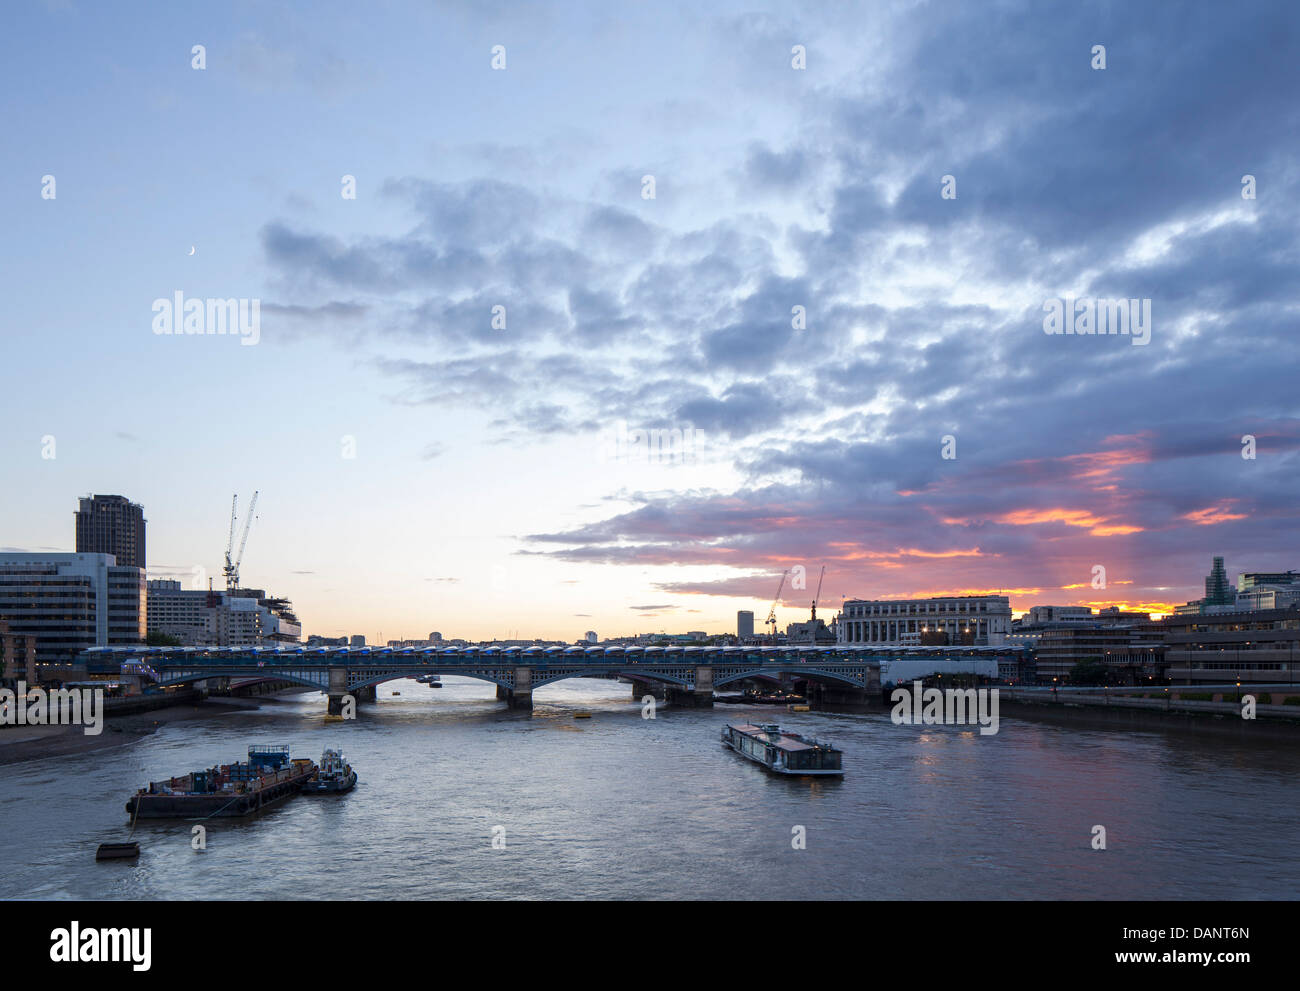 London Skyline In 2012 And 2013 with Blackfriars Station, London, United Kingdom. Architect:  Pascall+Watson, 2014. View looking Stock Photo